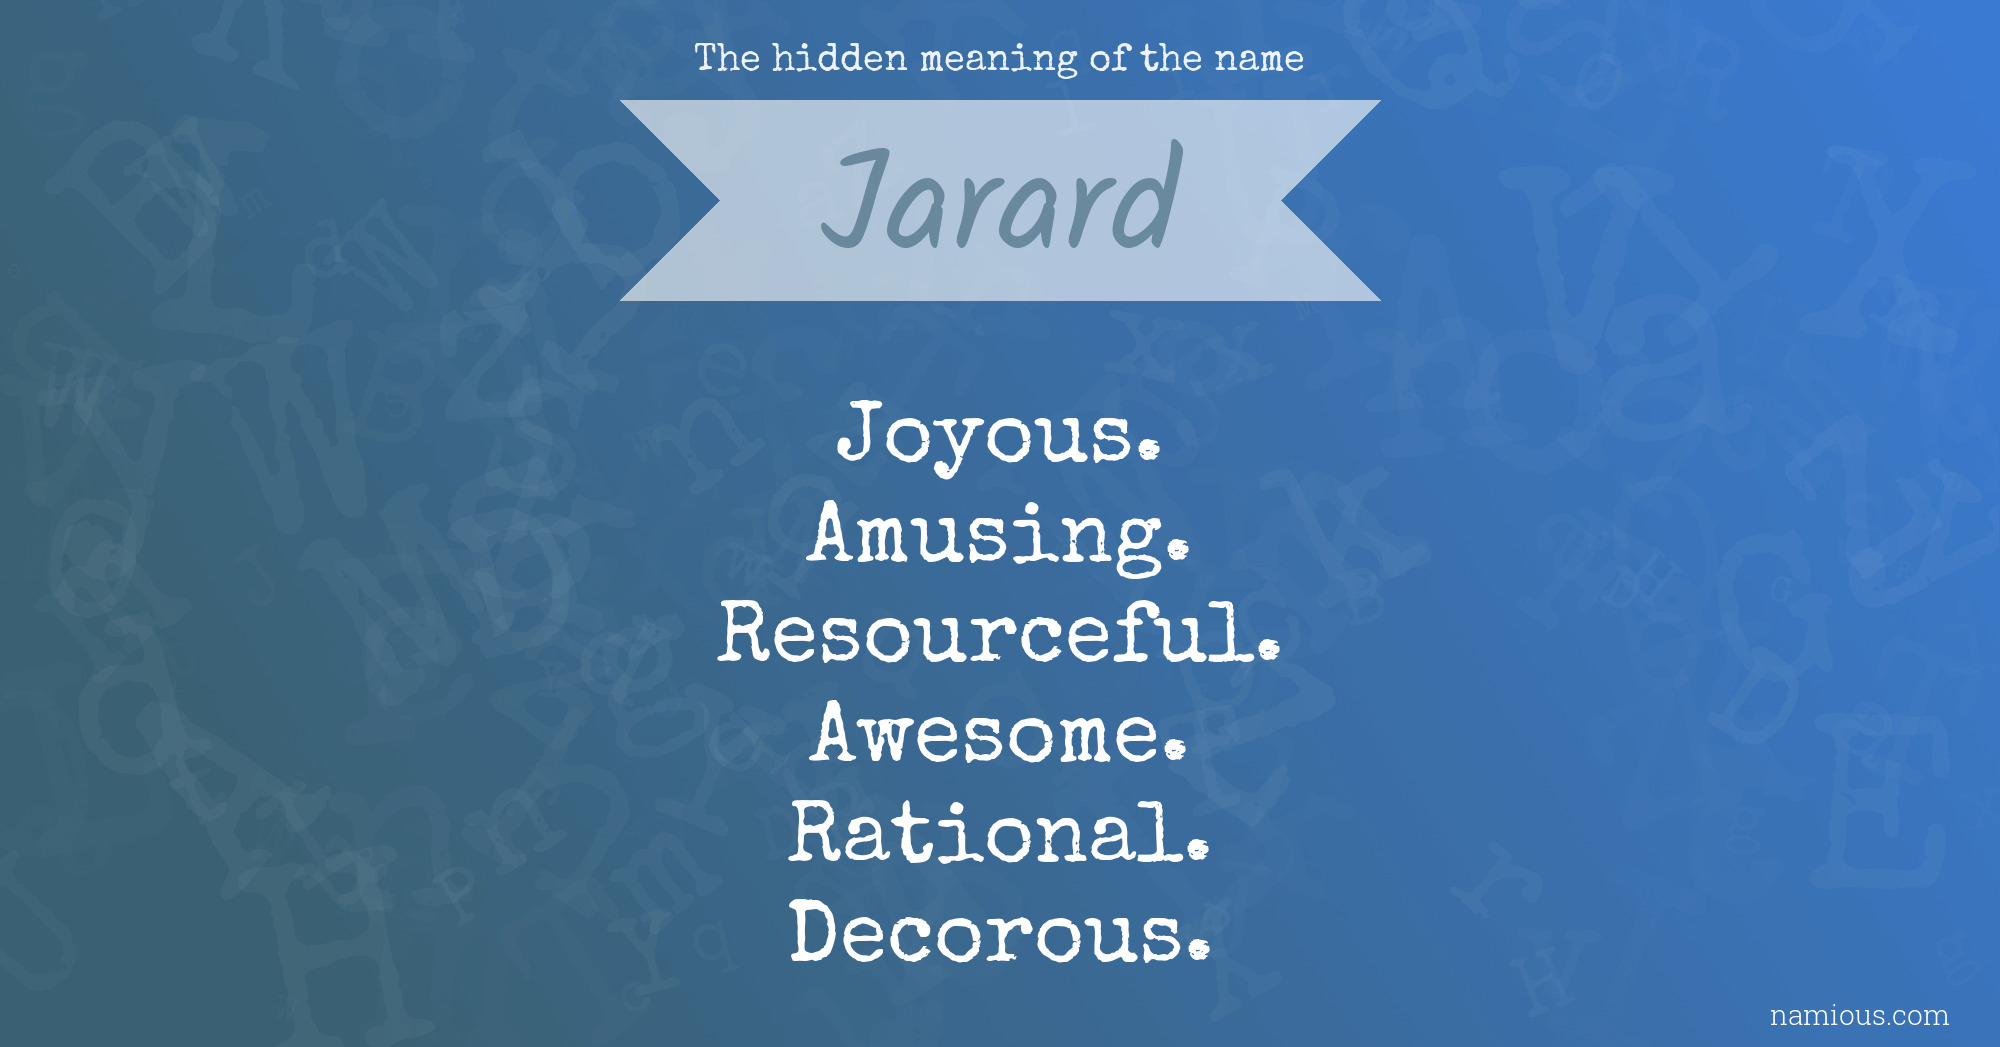 The hidden meaning of the name Jarard